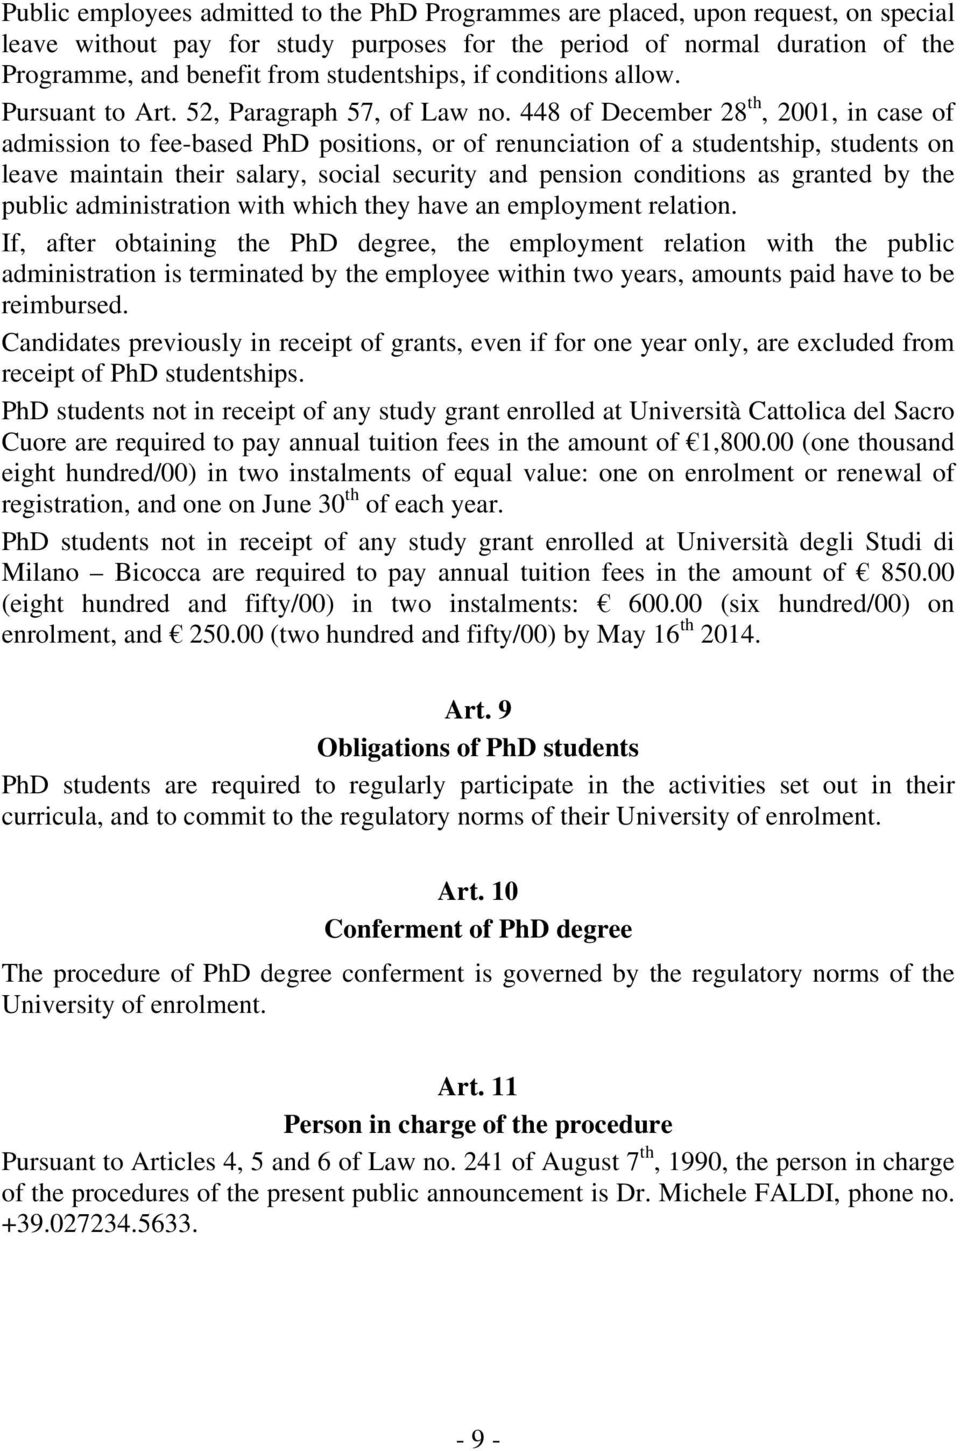 448 of December 28 th, 2001, in case of admission to fee-based PhD positions, or of renunciation of a studentship, students on leave maintain their salary, social security and pension conditions as